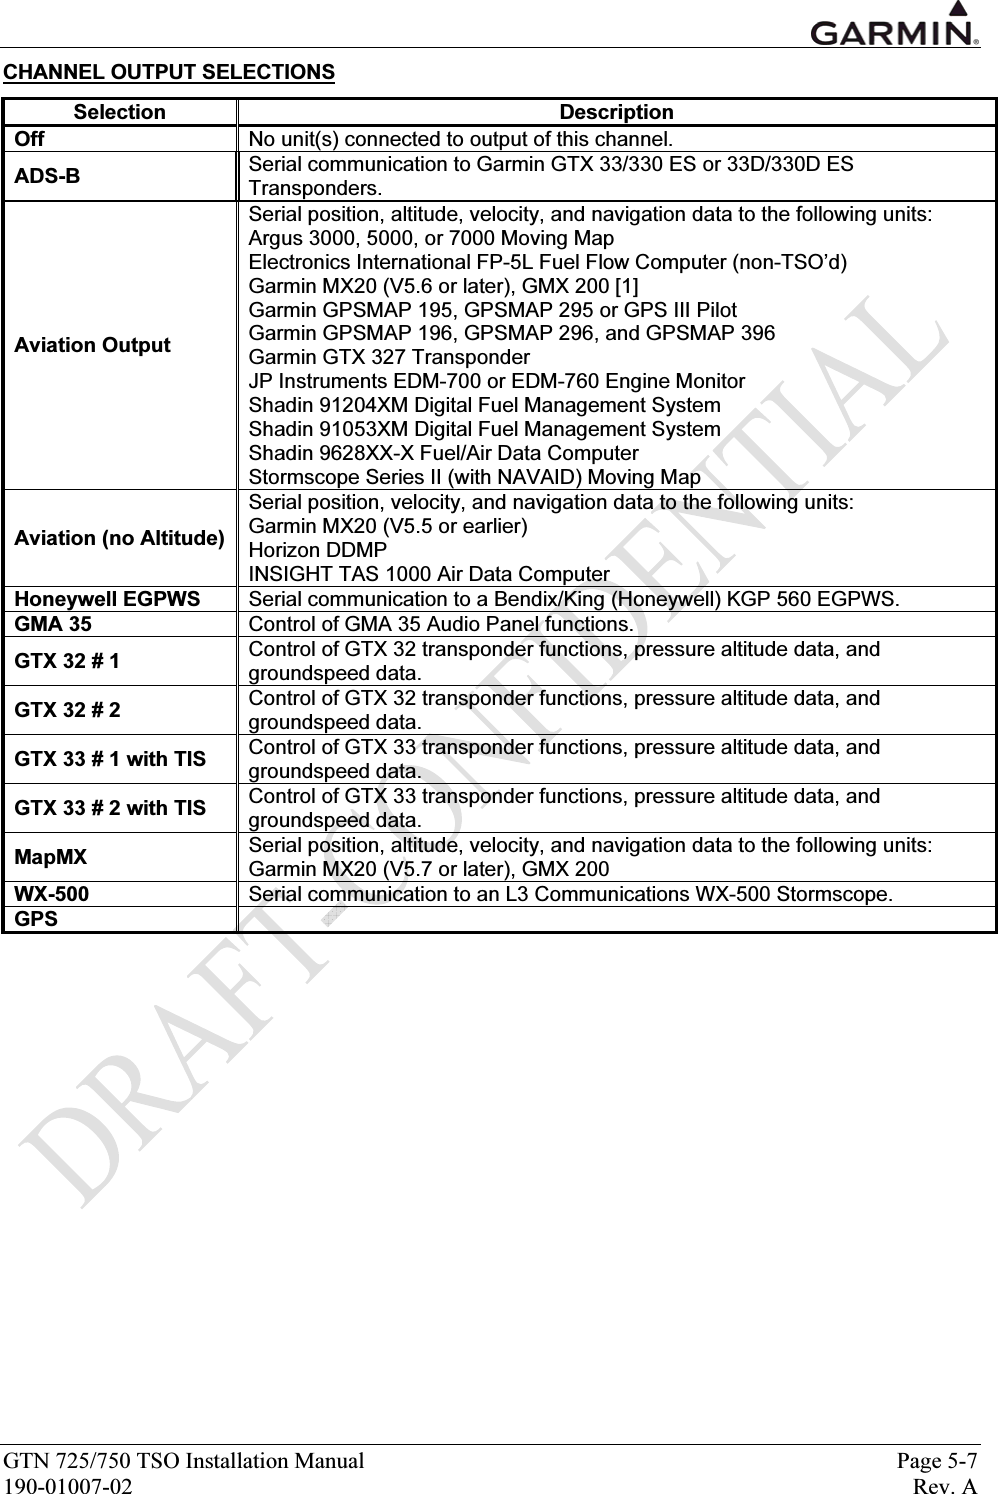  GTN 725/750 TSO Installation Manual  Page 5-7 190-01007-02  Rev. A CHANNEL OUTPUT SELECTIONS Selection Description Off  No unit(s) connected to output of this channel. ADS-B  Serial communication to Garmin GTX 33/330 ES or 33D/330D ES Transponders. Aviation Output Serial position, altitude, velocity, and navigation data to the following units: Argus 3000, 5000, or 7000 Moving Map Electronics International FP-5L Fuel Flow Computer (non-TSO’d) Garmin MX20 (V5.6 or later), GMX 200 [1] Garmin GPSMAP 195, GPSMAP 295 or GPS III Pilot Garmin GPSMAP 196, GPSMAP 296, and GPSMAP 396 Garmin GTX 327 Transponder JP Instruments EDM-700 or EDM-760 Engine Monitor Shadin 91204XM Digital Fuel Management System Shadin 91053XM Digital Fuel Management System Shadin 9628XX-X Fuel/Air Data Computer Stormscope Series II (with NAVAID) Moving Map Aviation (no Altitude) Serial position, velocity, and navigation data to the following units: Garmin MX20 (V5.5 or earlier) Horizon DDMP INSIGHT TAS 1000 Air Data Computer Honeywell EGPWS  Serial communication to a Bendix/King (Honeywell) KGP 560 EGPWS. GMA 35  Control of GMA 35 Audio Panel functions. GTX 32 # 1  Control of GTX 32 transponder functions, pressure altitude data, and groundspeed data. GTX 32 # 2  Control of GTX 32 transponder functions, pressure altitude data, and groundspeed data. GTX 33 # 1 with TIS  Control of GTX 33 transponder functions, pressure altitude data, and groundspeed data. GTX 33 # 2 with TIS  Control of GTX 33 transponder functions, pressure altitude data, and groundspeed data. MapMX  Serial position, altitude, velocity, and navigation data to the following units: Garmin MX20 (V5.7 or later), GMX 200 WX-500  Serial communication to an L3 Communications WX-500 Stormscope. GPS    